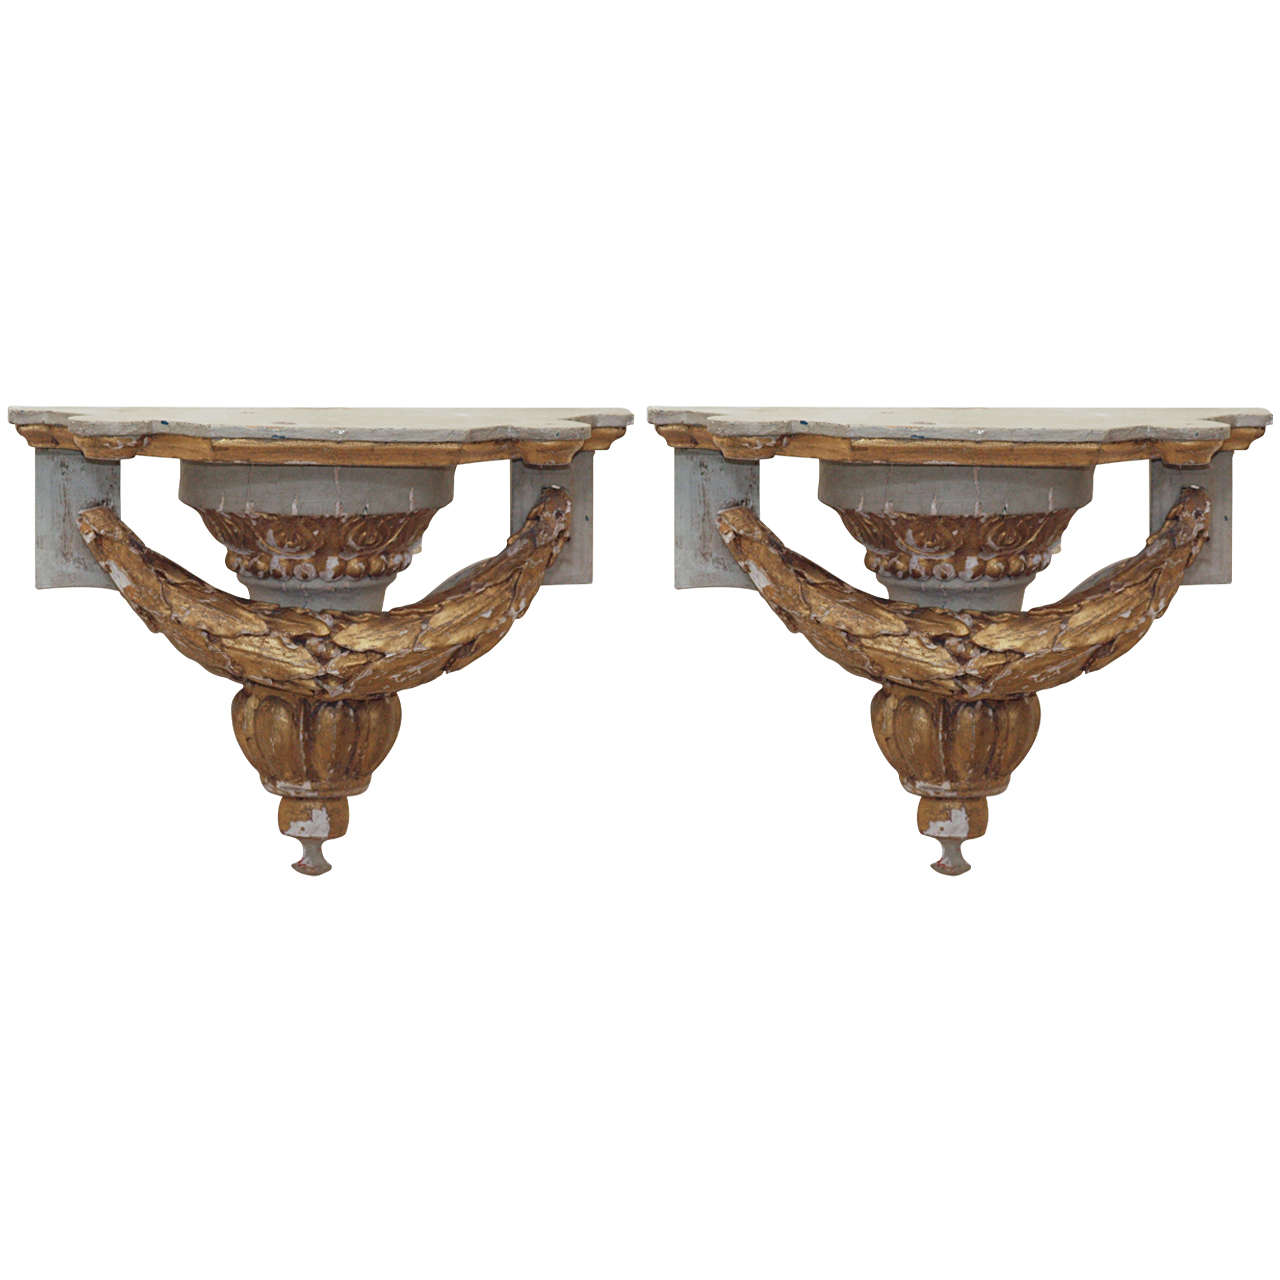 Pair of 18th Century Carved Wall Brackets